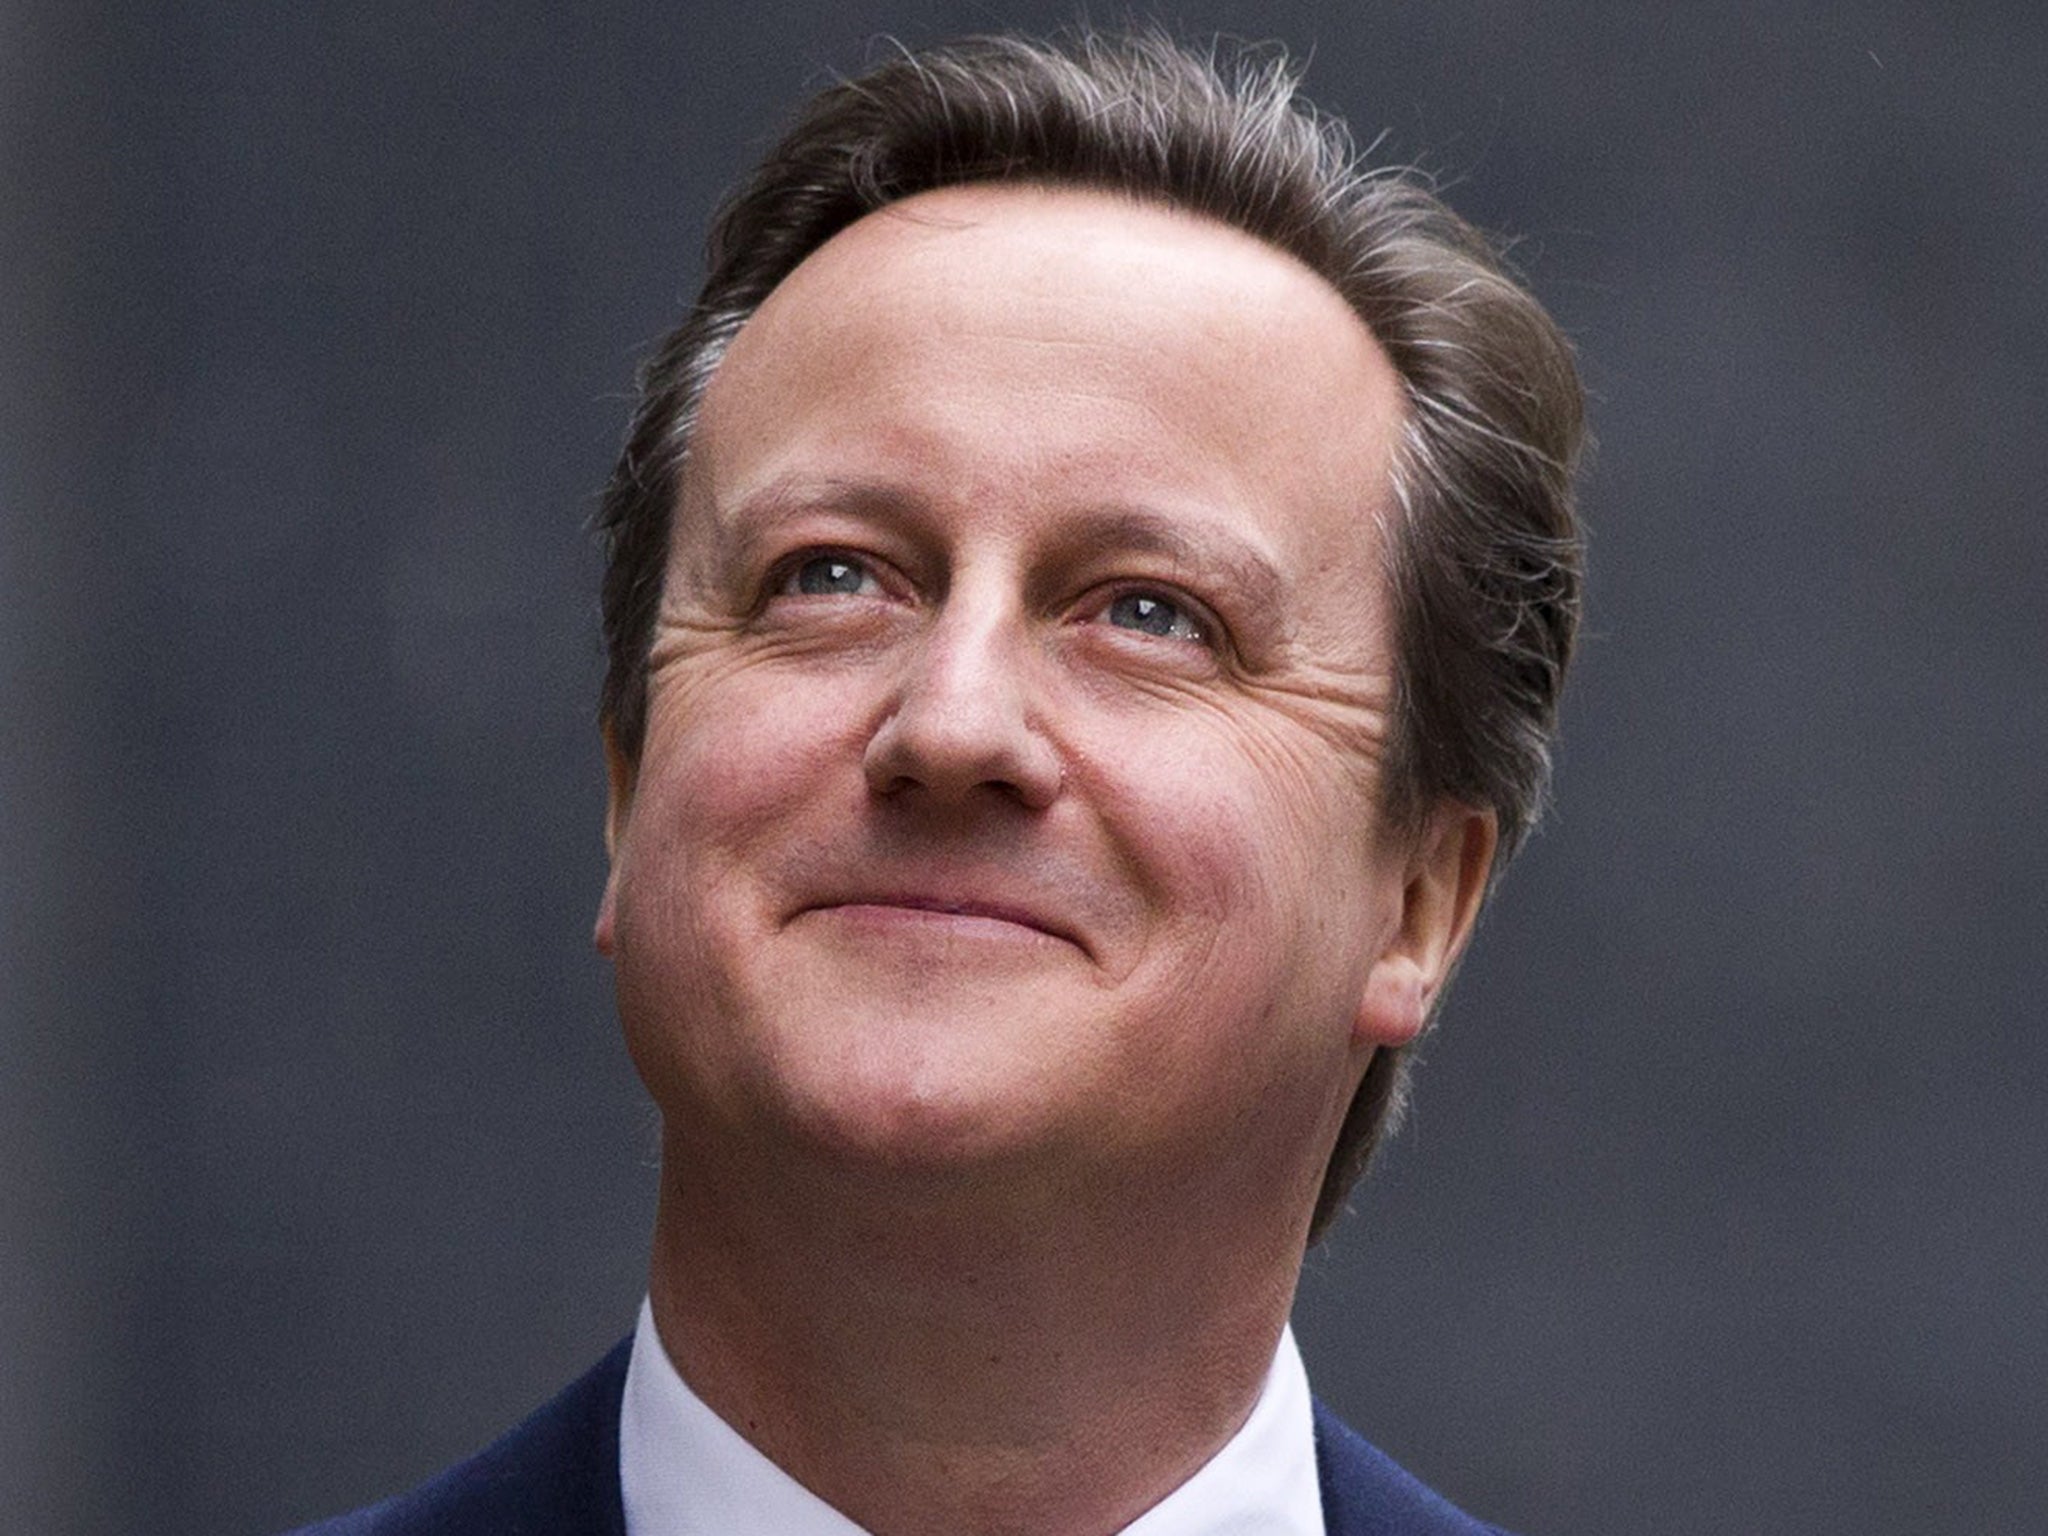 David Cameron has been told that he is 'everyone's Prime Minister' and needs to represent the whole UK